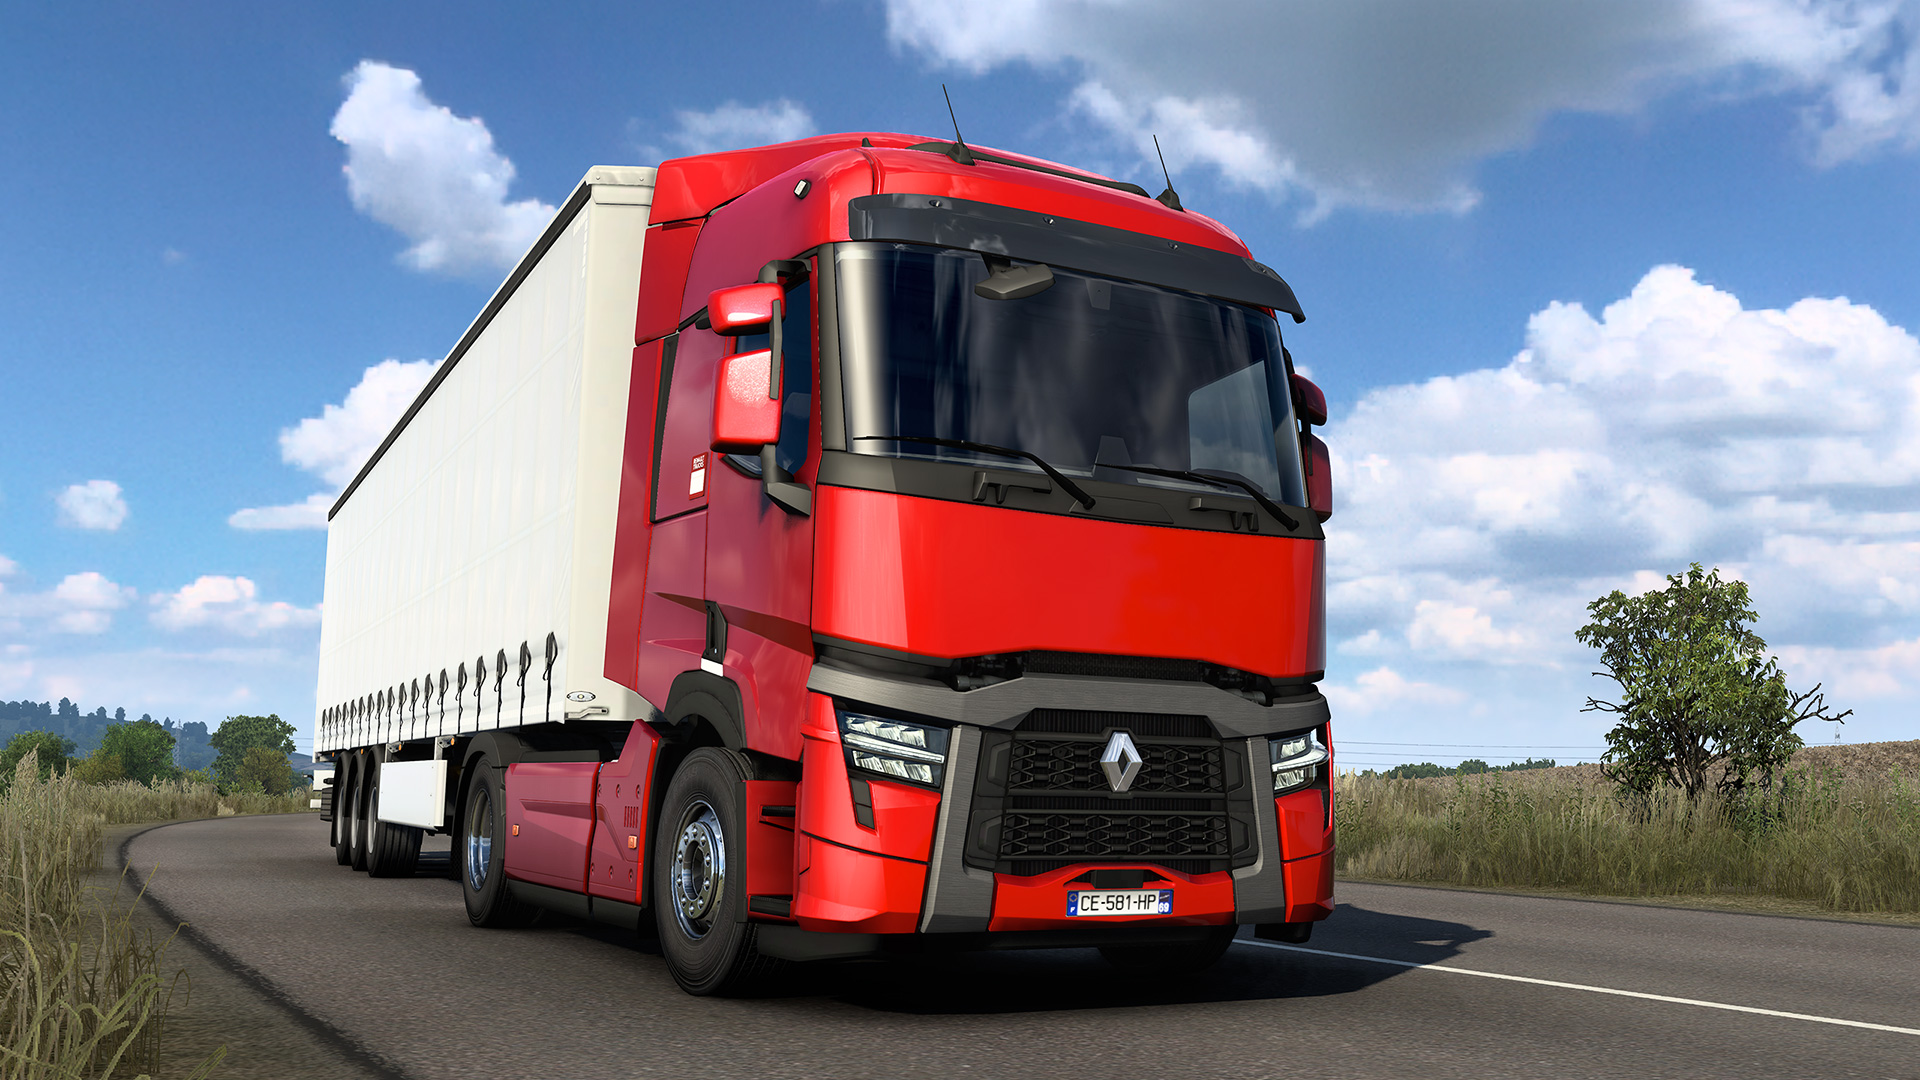 Scs Software We Are Proud And Excited To Announce That The Renaulttrucksevolution T And T High Vehicles Are Now Available In Ets2 On Steam Additionally We Have Something Unique